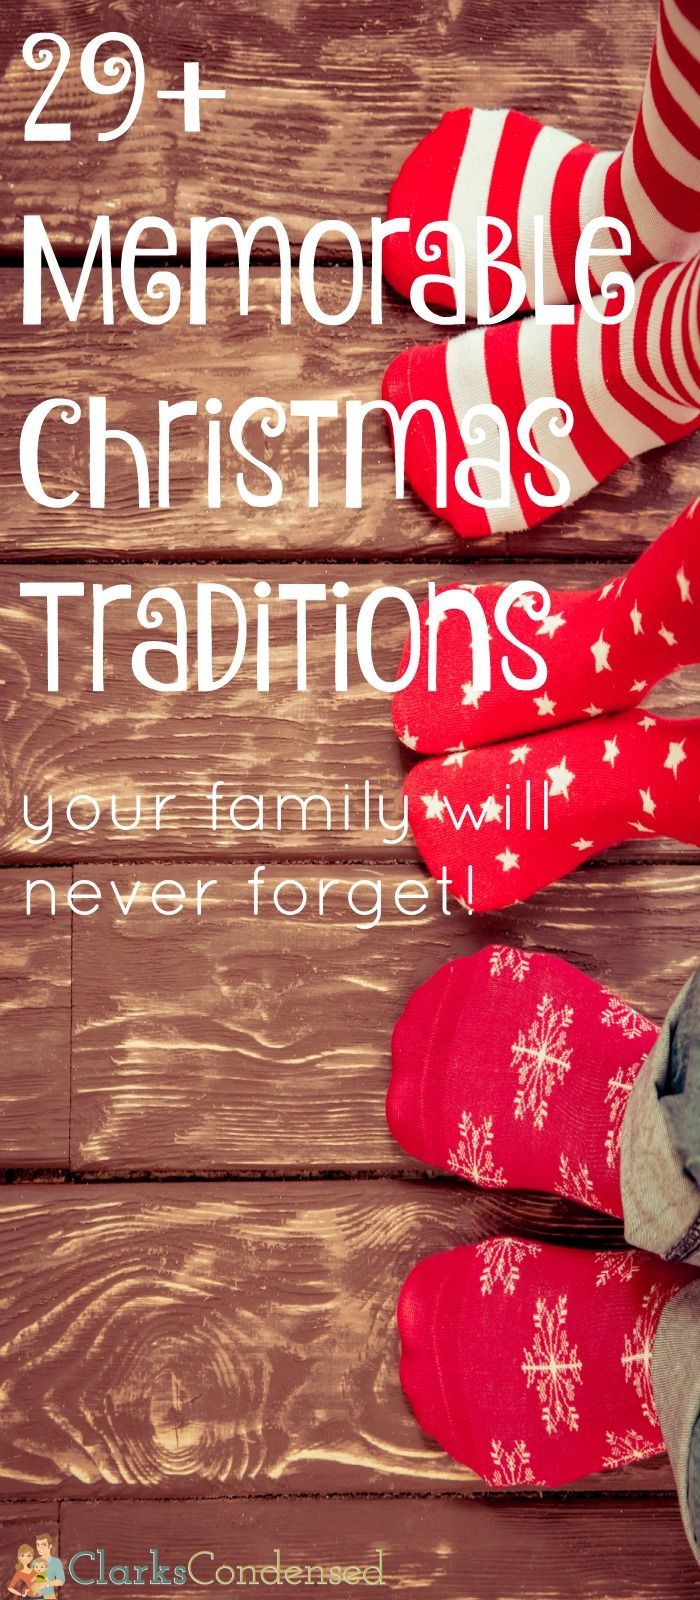 I love Christmas traditions! Here are 29+ memorable family Christmas traditions that will create a lifetim